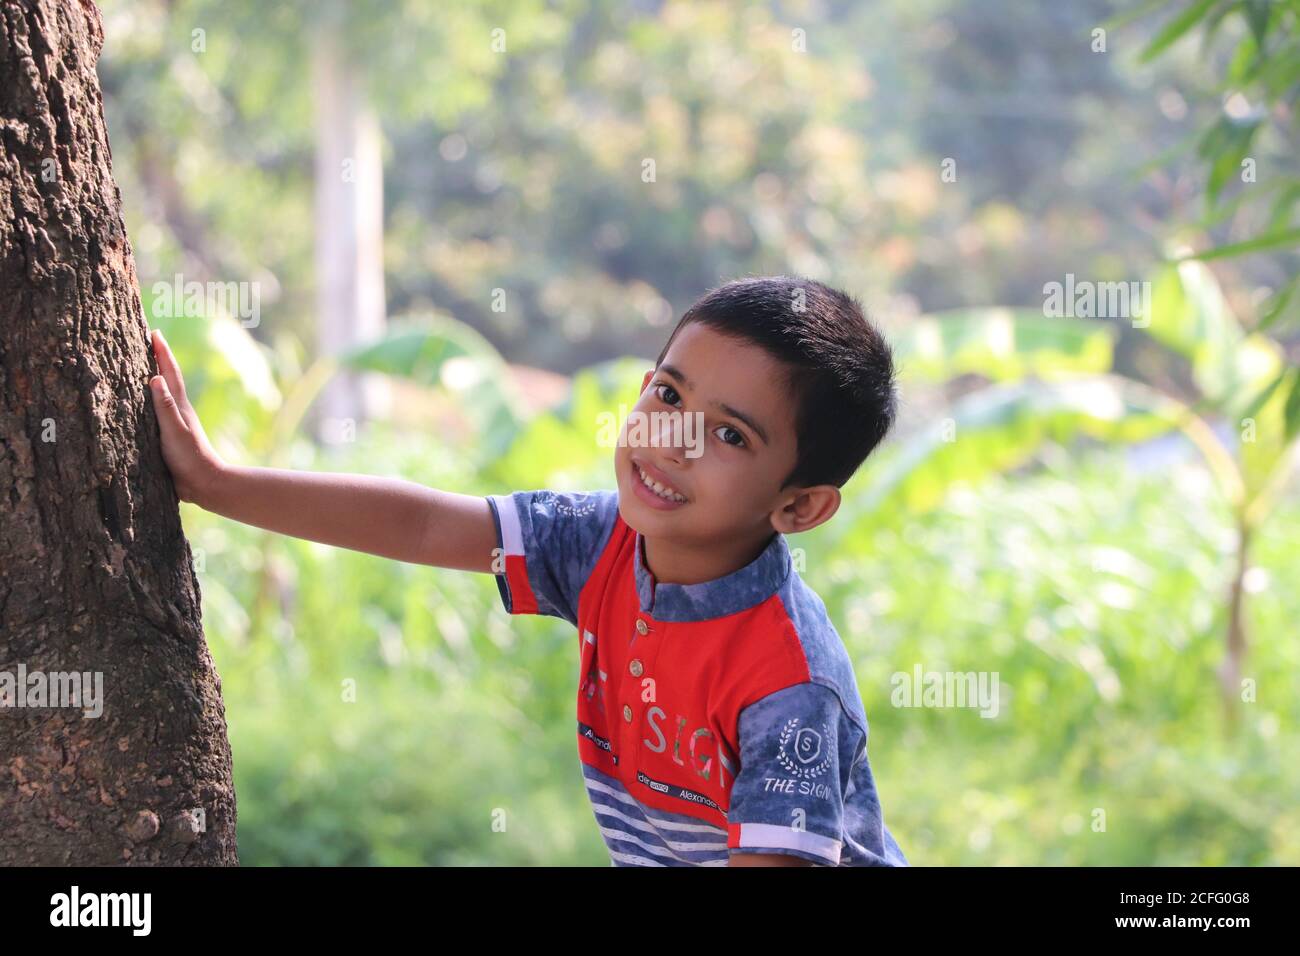 Cute little boy smiling, expressing happiness while posing for photo in the village Stock Photo